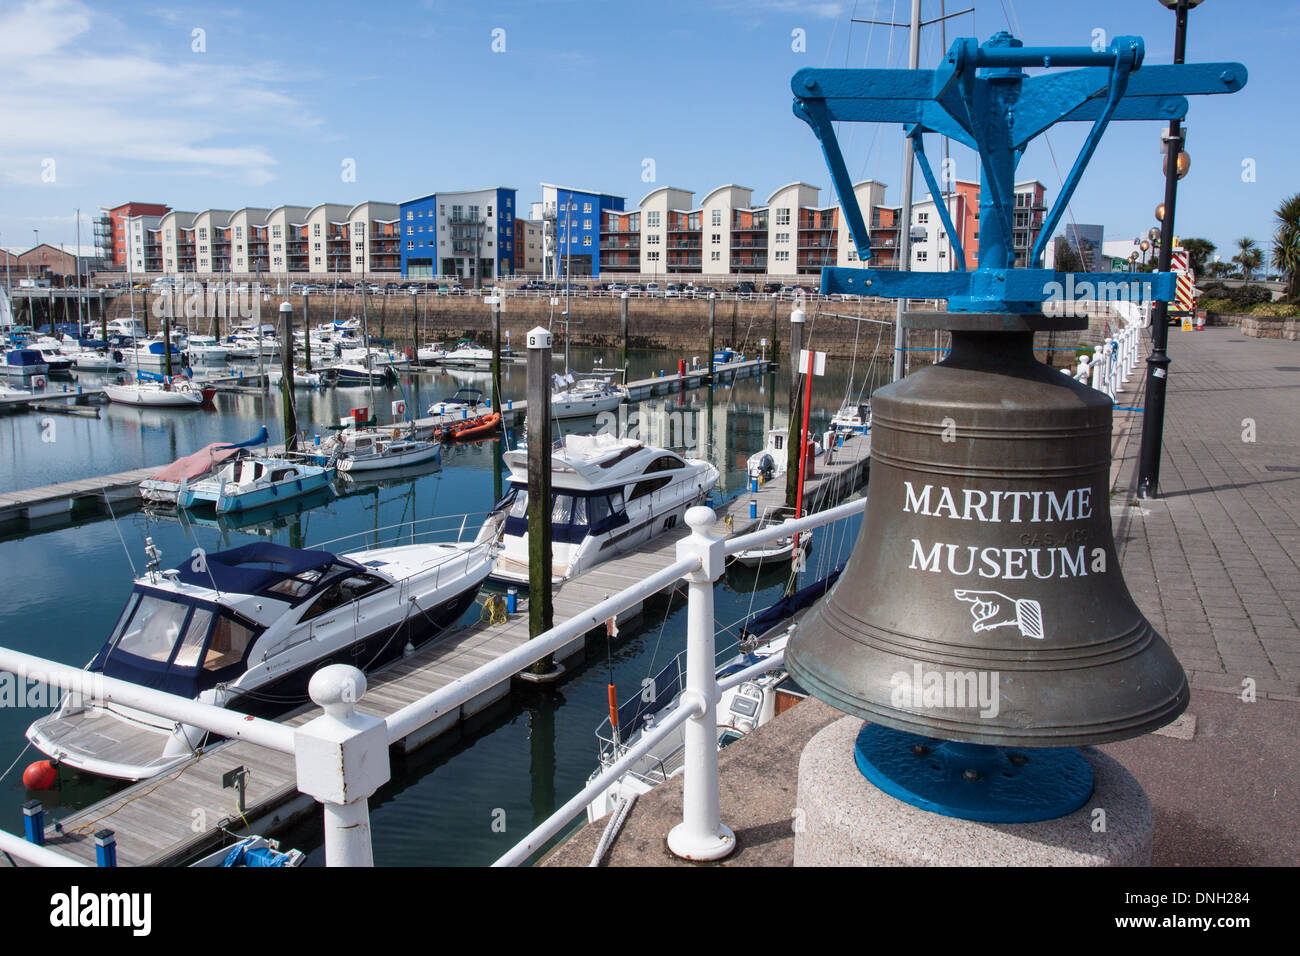 PORT OF SAINT HELIER WITH A SHIP'S BELL POINTING IN THE DIRECTION OF THE  MARITIME MUSEUM, SAINT HELIER, JERSEY, CHANNEL ISLANDS Stock Photo - Alamy